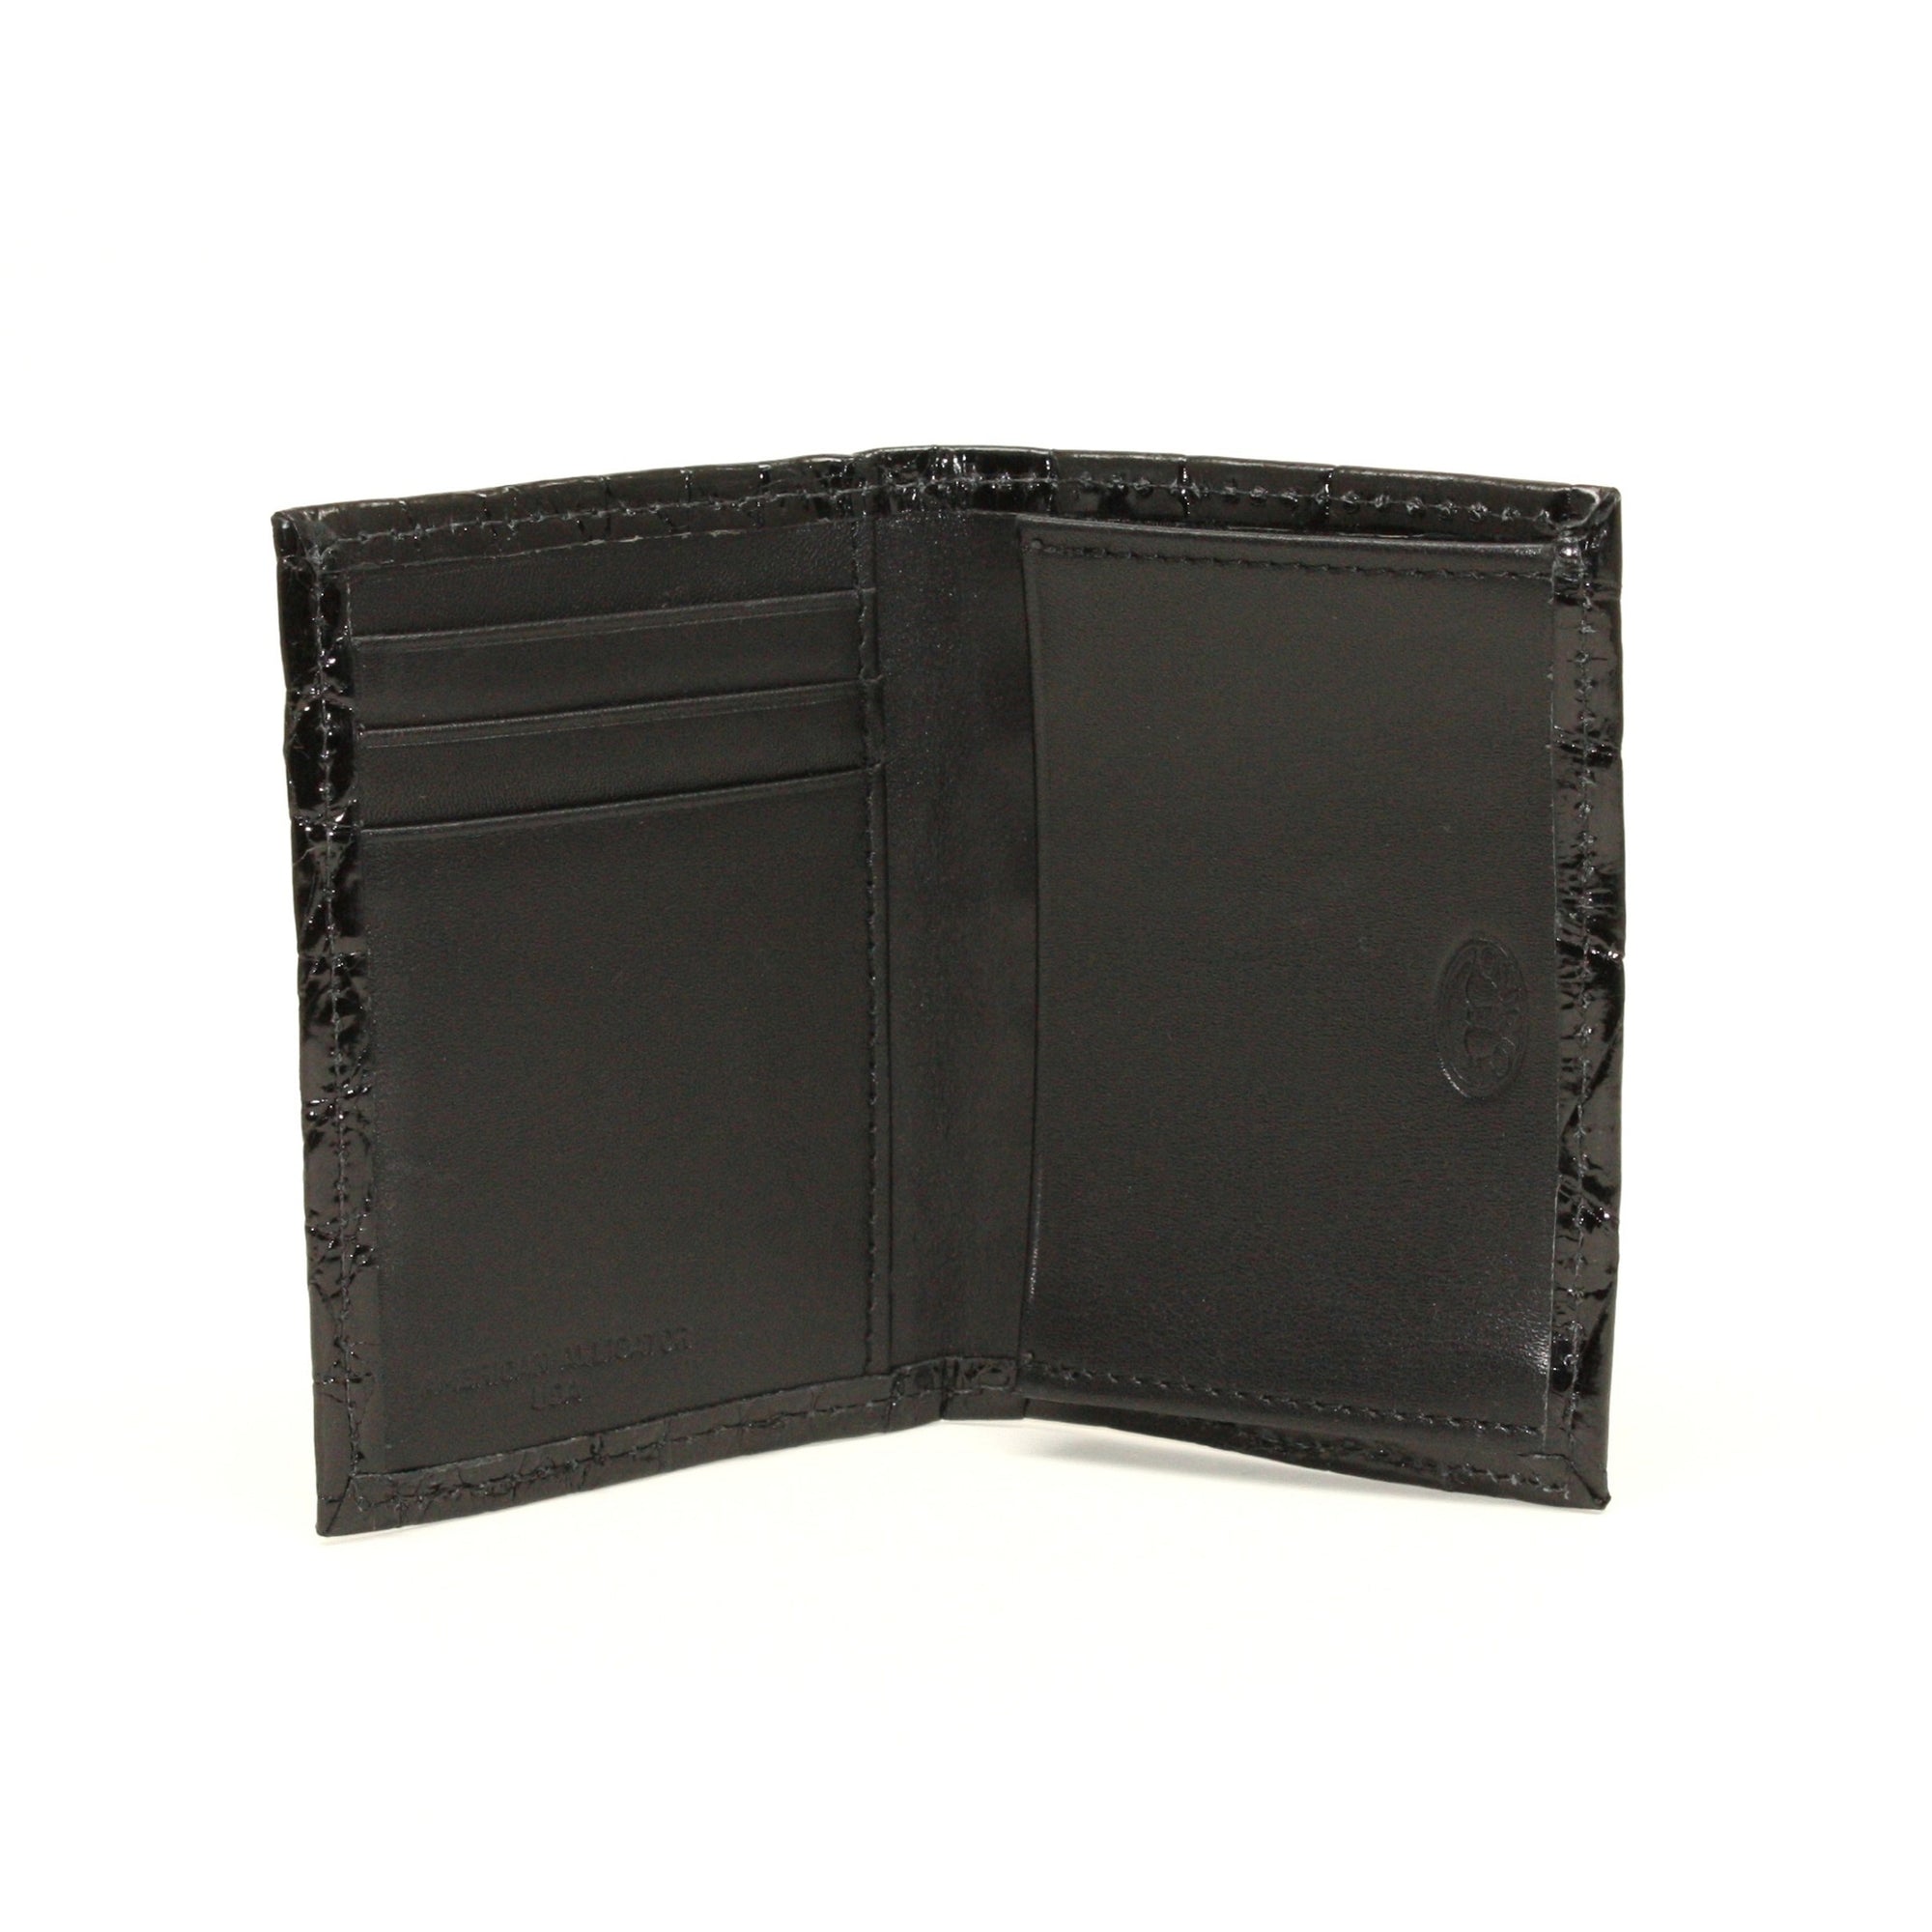 Genuine Alligator Gusseted Cardcase in Black by Torino Leather